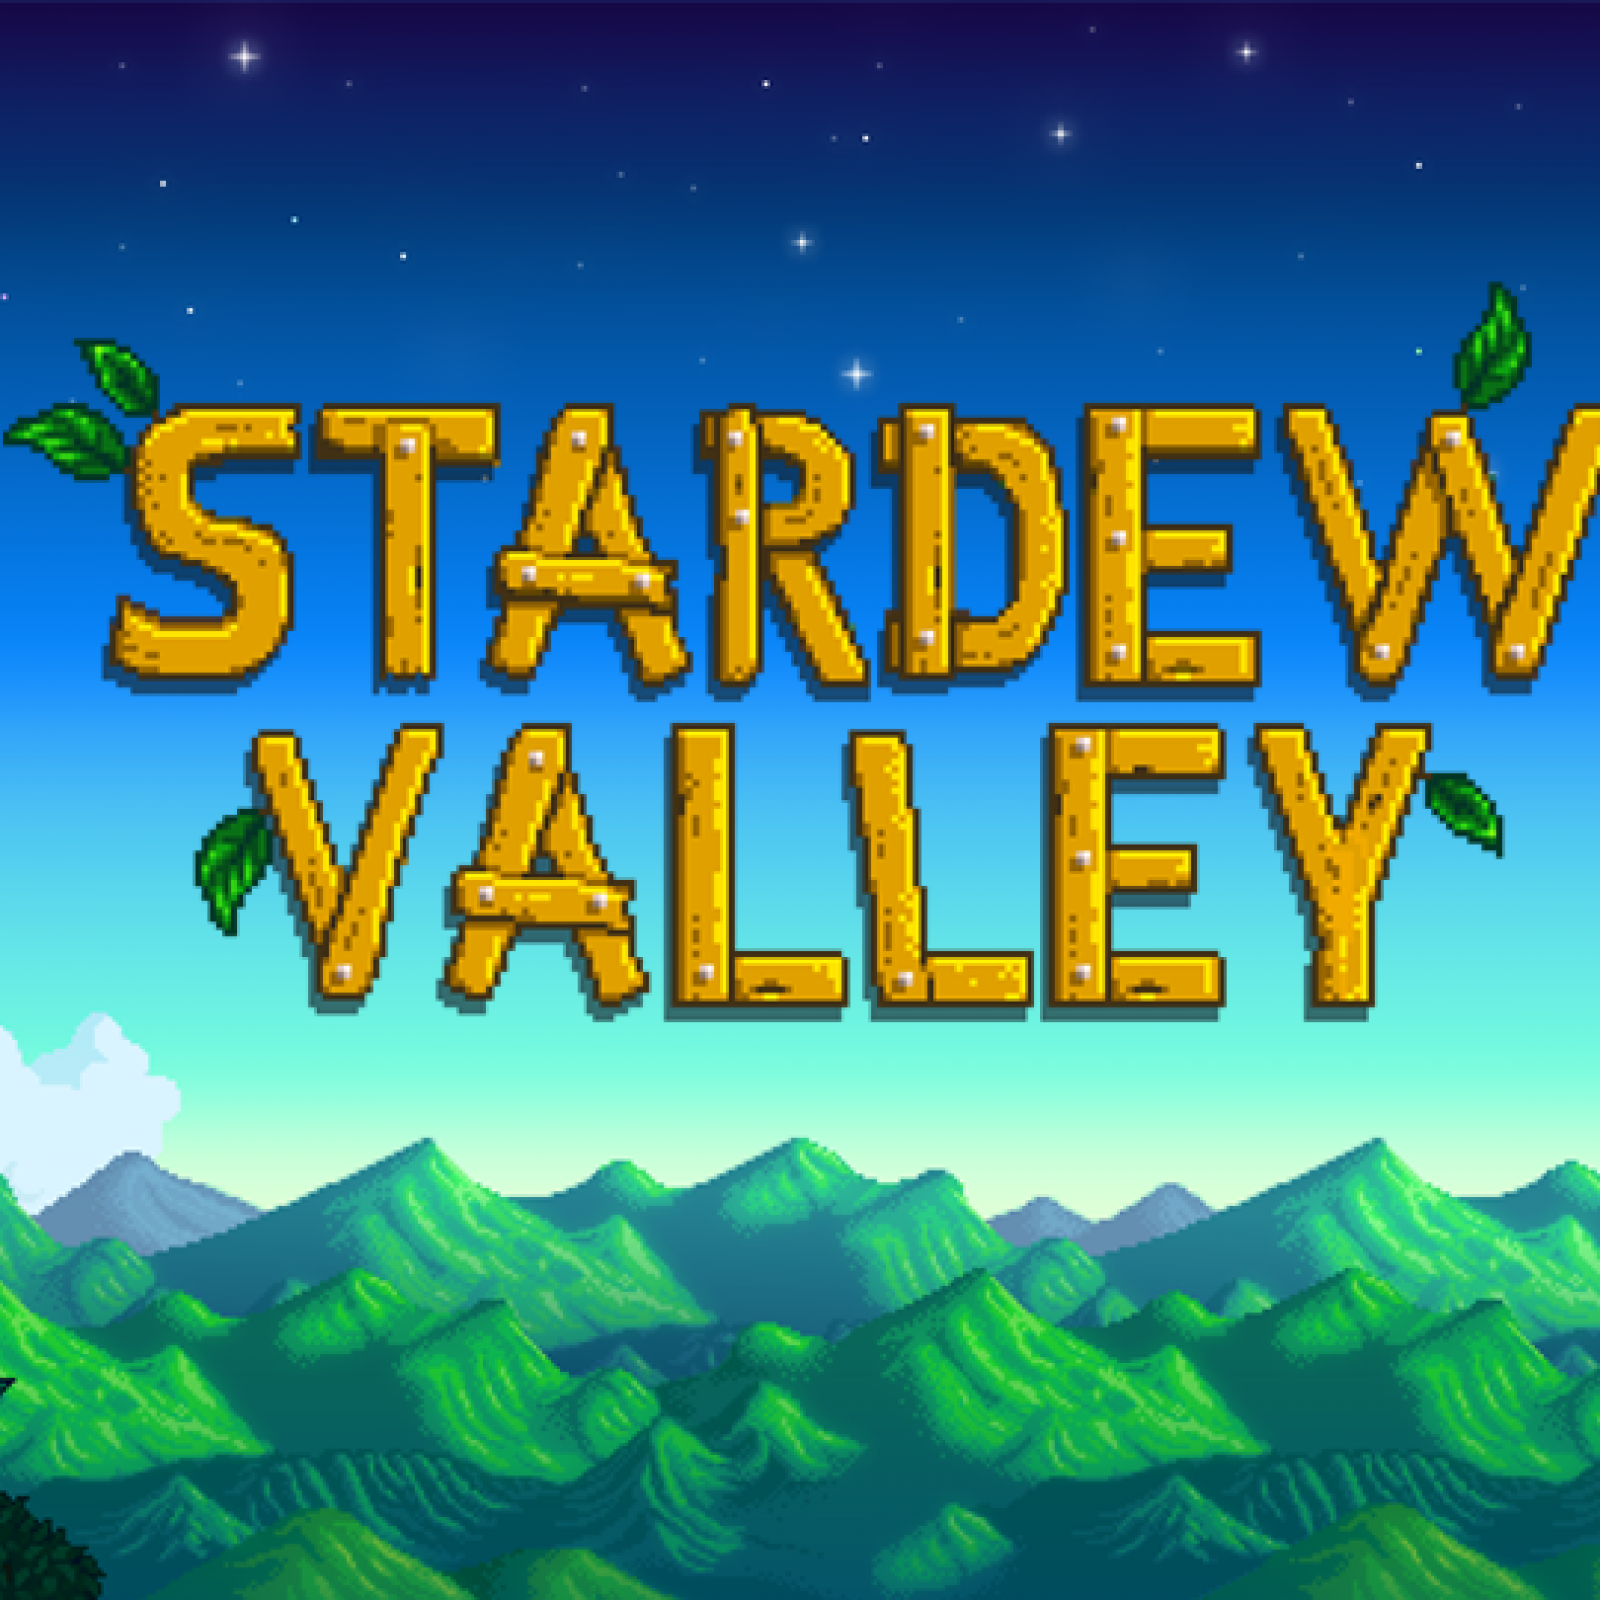 Stardew Valley' Update 1.4 on Switch, PS4: What to Expect From the Notes